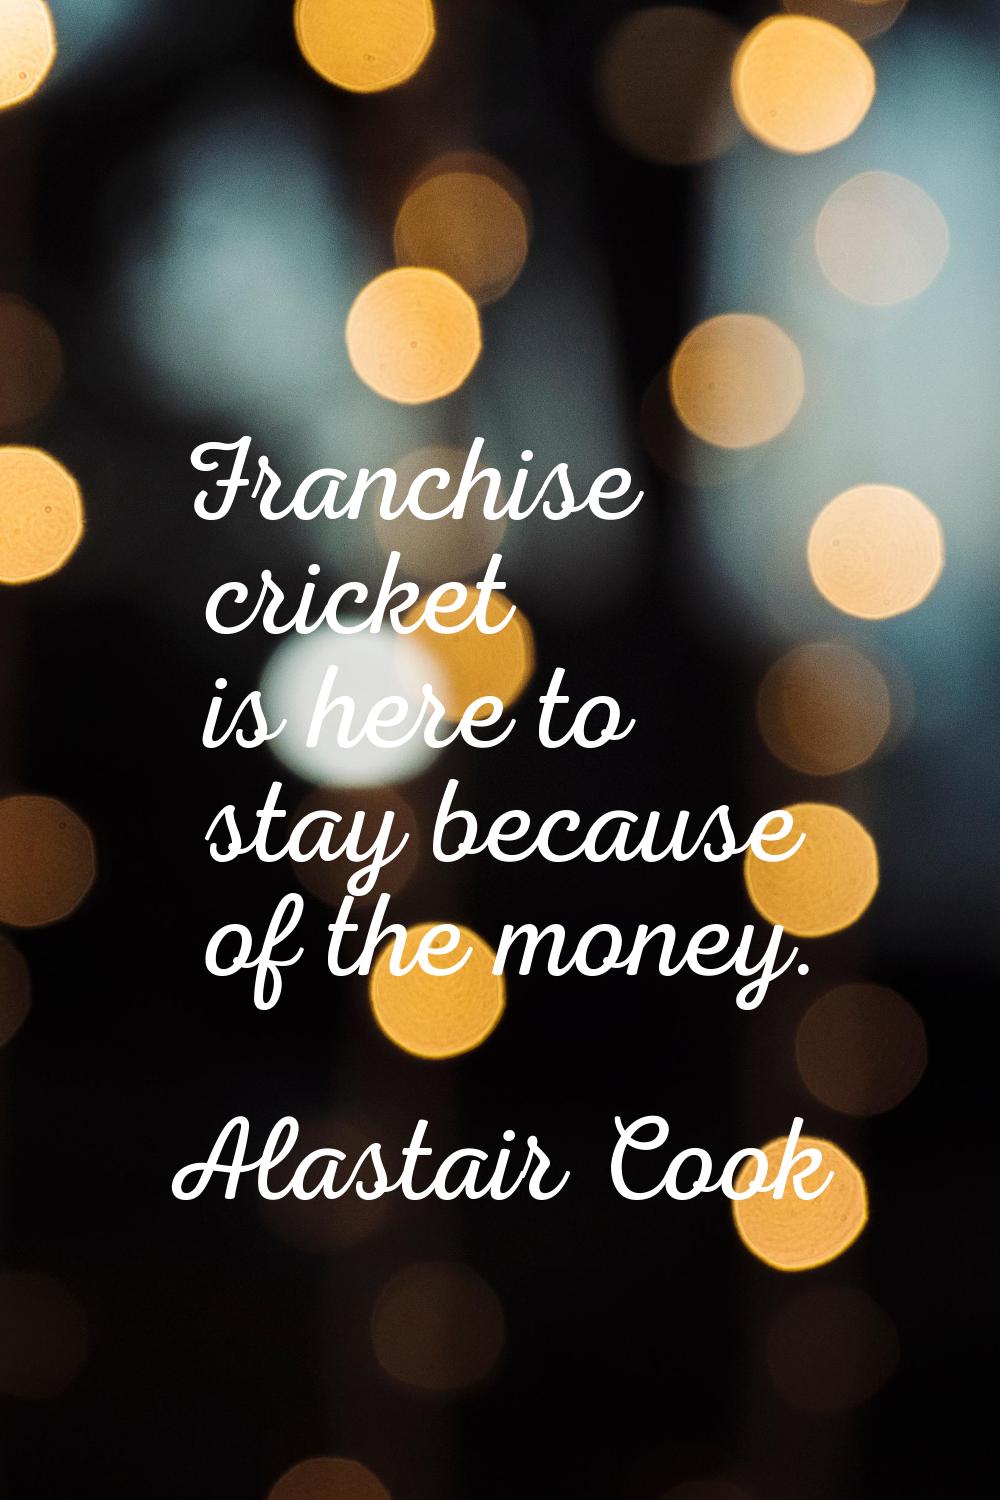 Franchise cricket is here to stay because of the money.